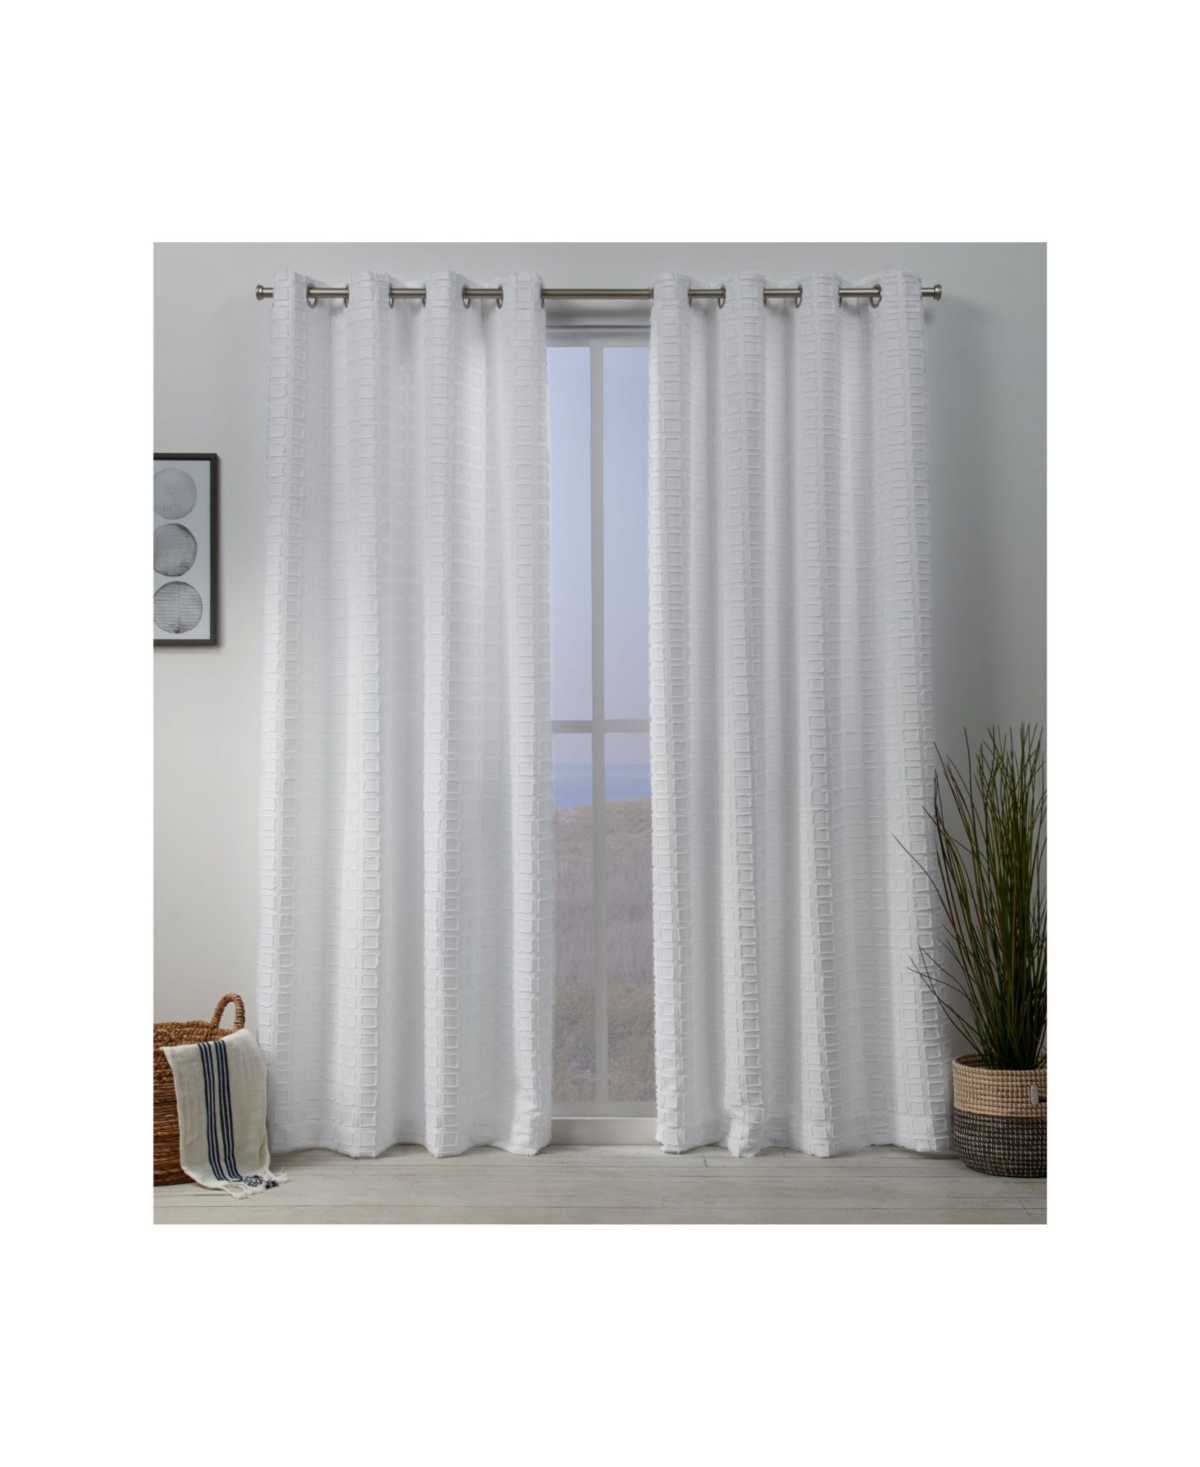 Squared Embellished Grommet Top Curtain Panel Pair, 54" x 108" - White